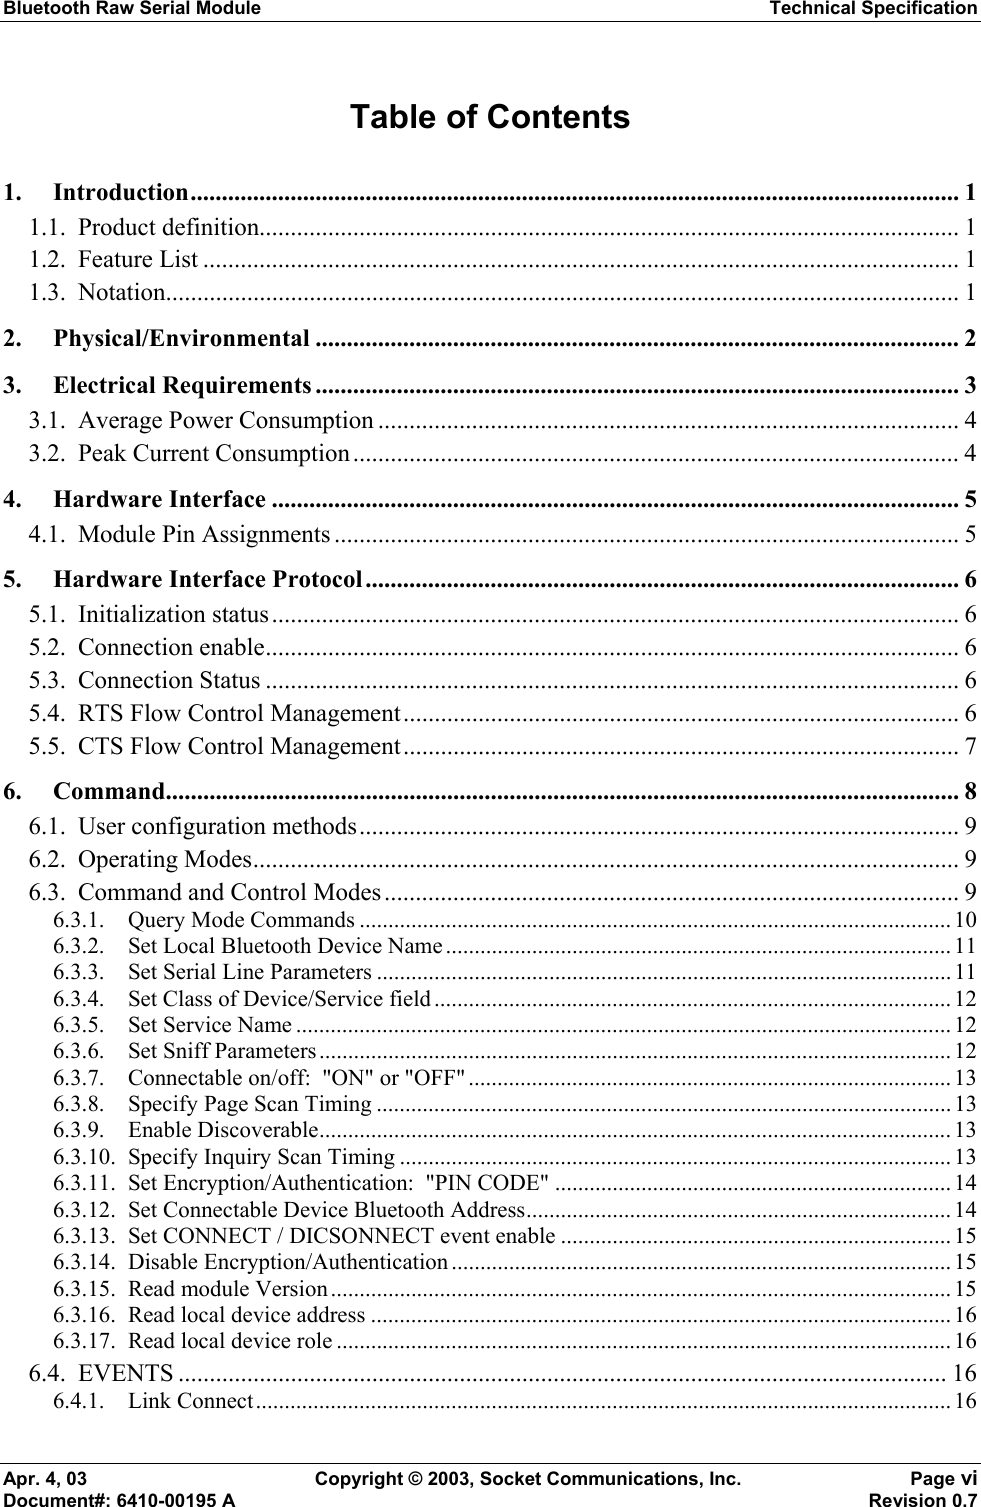 Bluetooth Raw Serial Module Technical Specification Apr. 4, 03  Copyright © 2003, Socket Communications, Inc.  Page vi Document#: 6410-00195 A    Revision 0.7 Table of Contents 1. Introduction........................................................................................................................... 1 1.1. Product definition................................................................................................................ 1 1.2. Feature List ......................................................................................................................... 1 1.3. Notation............................................................................................................................... 1 2. Physical/Environmental ....................................................................................................... 2 3. Electrical Requirements ....................................................................................................... 3 3.1.  Average Power Consumption ............................................................................................. 4 3.2.  Peak Current Consumption................................................................................................. 4 4. Hardware Interface ..............................................................................................................5 4.1. Module Pin Assignments .................................................................................................... 5 5. Hardware Interface Protocol............................................................................................... 6 5.1. Initialization status.............................................................................................................. 6 5.2. Connection enable............................................................................................................... 6 5.3. Connection Status ............................................................................................................... 6 5.4.  RTS Flow Control Management......................................................................................... 6 5.5.  CTS Flow Control Management......................................................................................... 7 6. Command............................................................................................................................... 8 6.1.  User configuration methods................................................................................................ 9 6.2. Operating Modes................................................................................................................. 9 6.3.  Command and Control Modes............................................................................................ 9 6.3.1. Query Mode Commands ....................................................................................................... 10 6.3.2. Set Local Bluetooth Device Name ........................................................................................ 11 6.3.3. Set Serial Line Parameters .................................................................................................... 11 6.3.4. Set Class of Device/Service field .......................................................................................... 12 6.3.5. Set Service Name .................................................................................................................. 12 6.3.6. Set Sniff Parameters.............................................................................................................. 12 6.3.7. Connectable on/off:  &quot;ON&quot; or &quot;OFF&quot;.................................................................................... 13 6.3.8. Specify Page Scan Timing ....................................................................................................13 6.3.9. Enable Discoverable.............................................................................................................. 13 6.3.10. Specify Inquiry Scan Timing ................................................................................................13 6.3.11. Set Encryption/Authentication:  &quot;PIN CODE&quot; .....................................................................14 6.3.12. Set Connectable Device Bluetooth Address.......................................................................... 14 6.3.13. Set CONNECT / DICSONNECT event enable .................................................................... 15 6.3.14. Disable Encryption/Authentication....................................................................................... 15 6.3.15. Read module Version............................................................................................................ 15 6.3.16. Read local device address ..................................................................................................... 16 6.3.17. Read local device role ........................................................................................................... 16 6.4. EVENTS ........................................................................................................................... 16 6.4.1. Link Connect......................................................................................................................... 16 